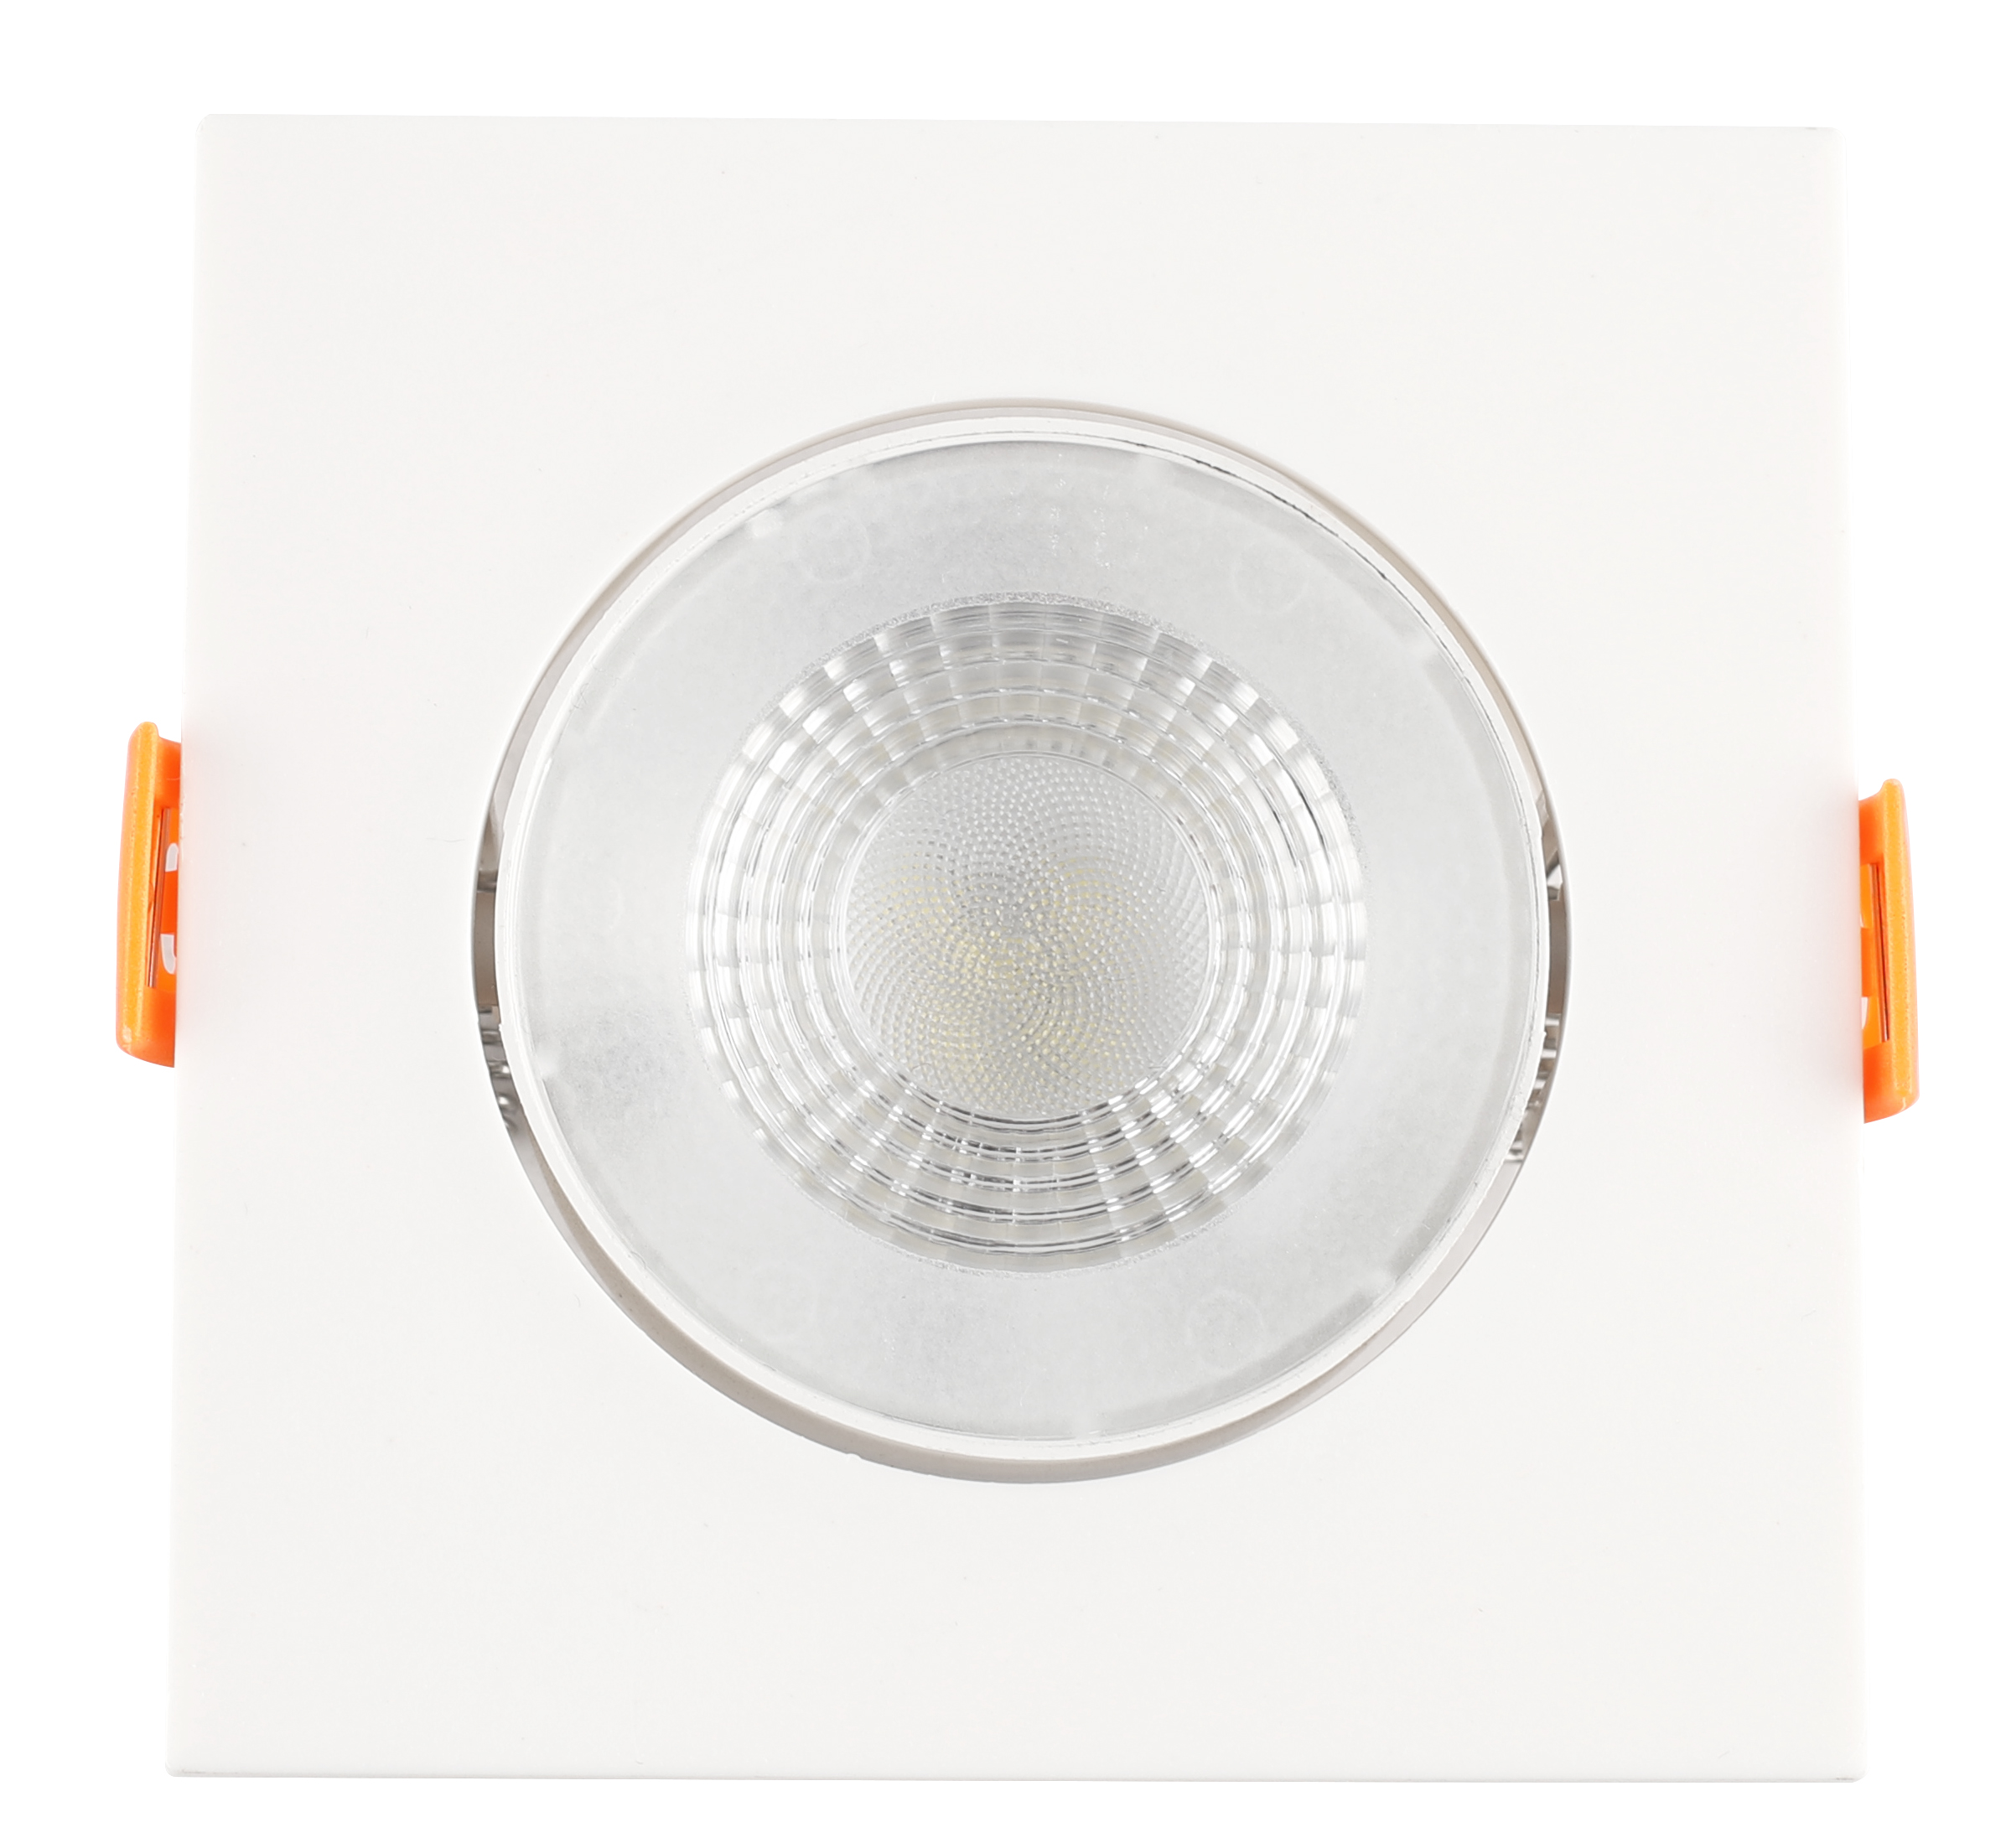 Hot Promotion Best-selling 3W 5W 7W 9W 12W Square Plastic Led Ceiling Light